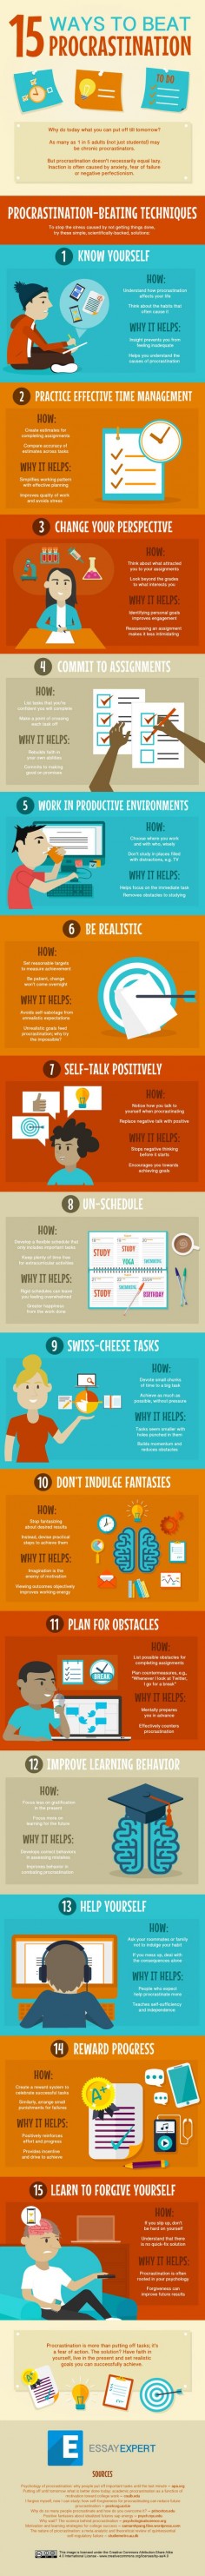 15 Ways to Overcome Procrastination and Get Stuff Done (Infographic) - Assumes you want to not procrastinate, anyway.